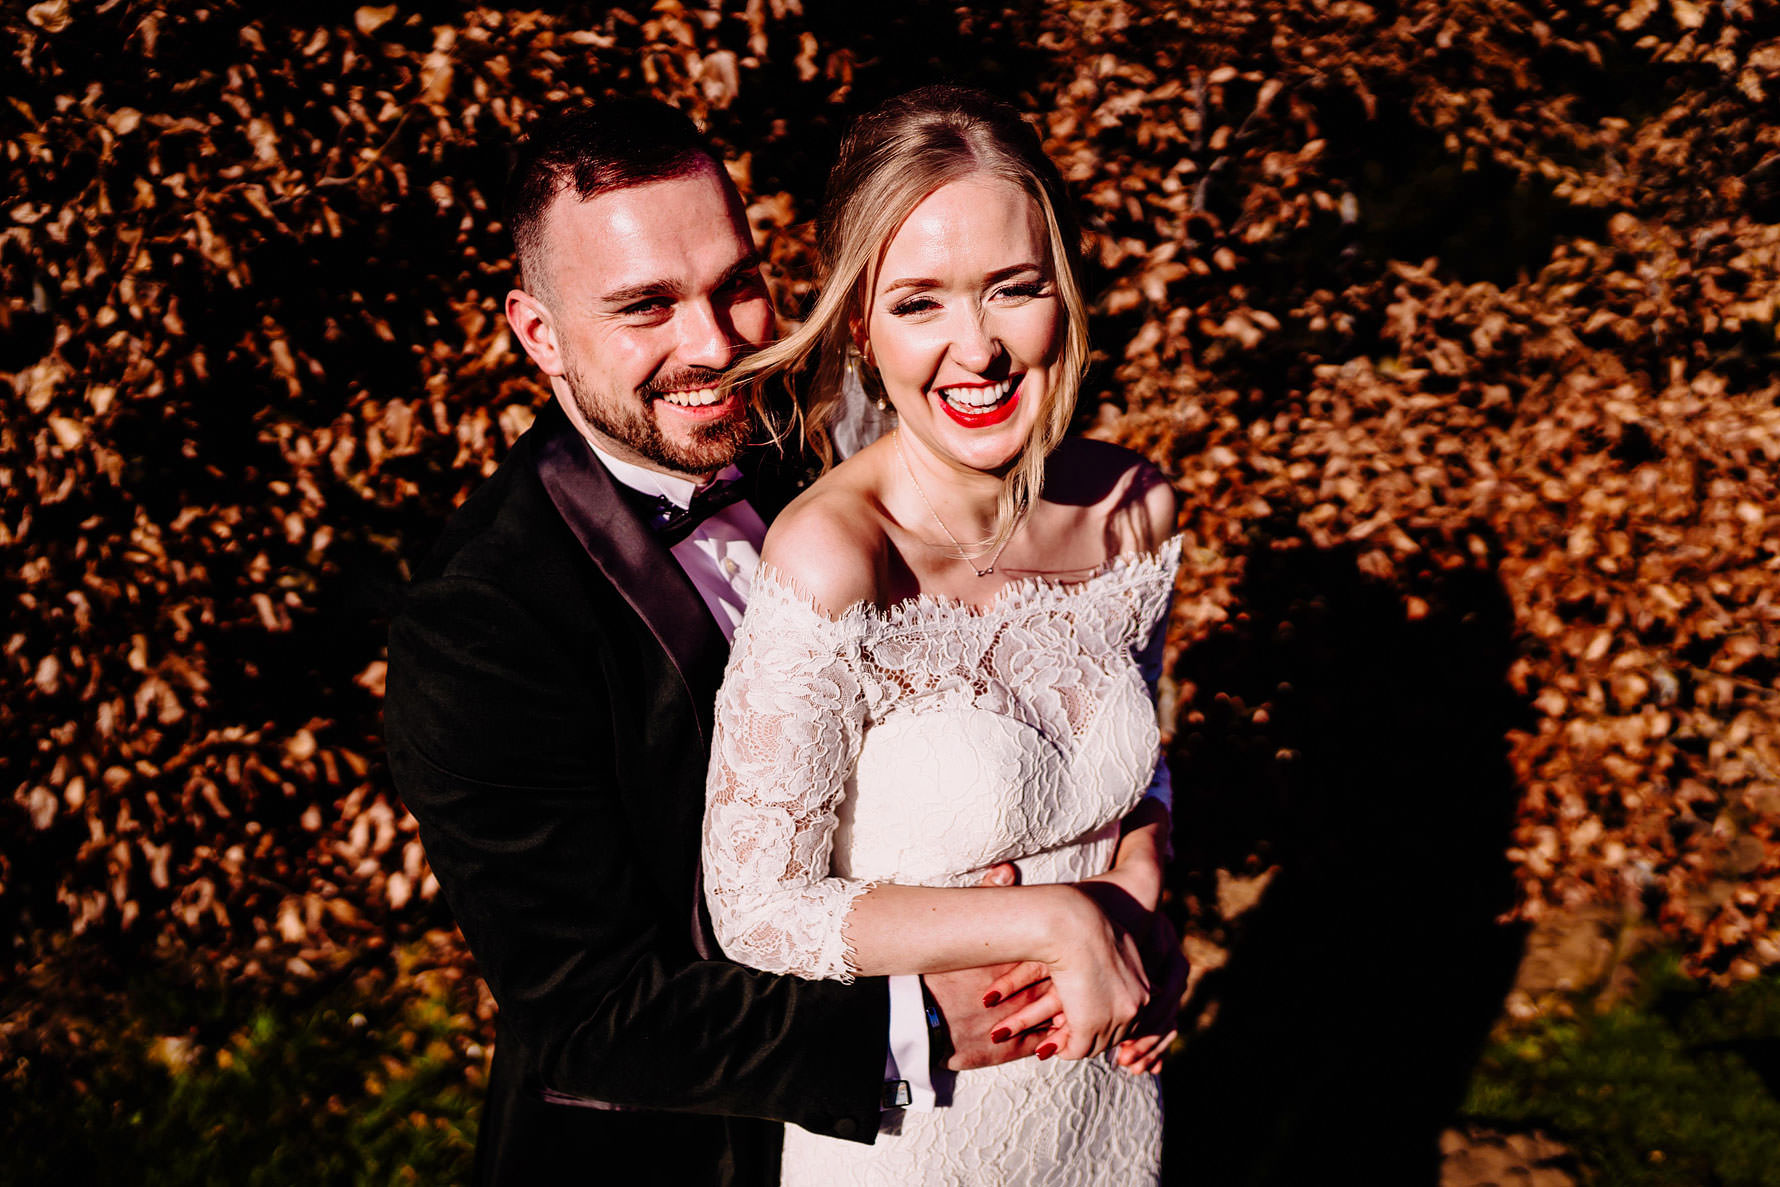 a colourful image of a bride and groom taken by Elliot w patching